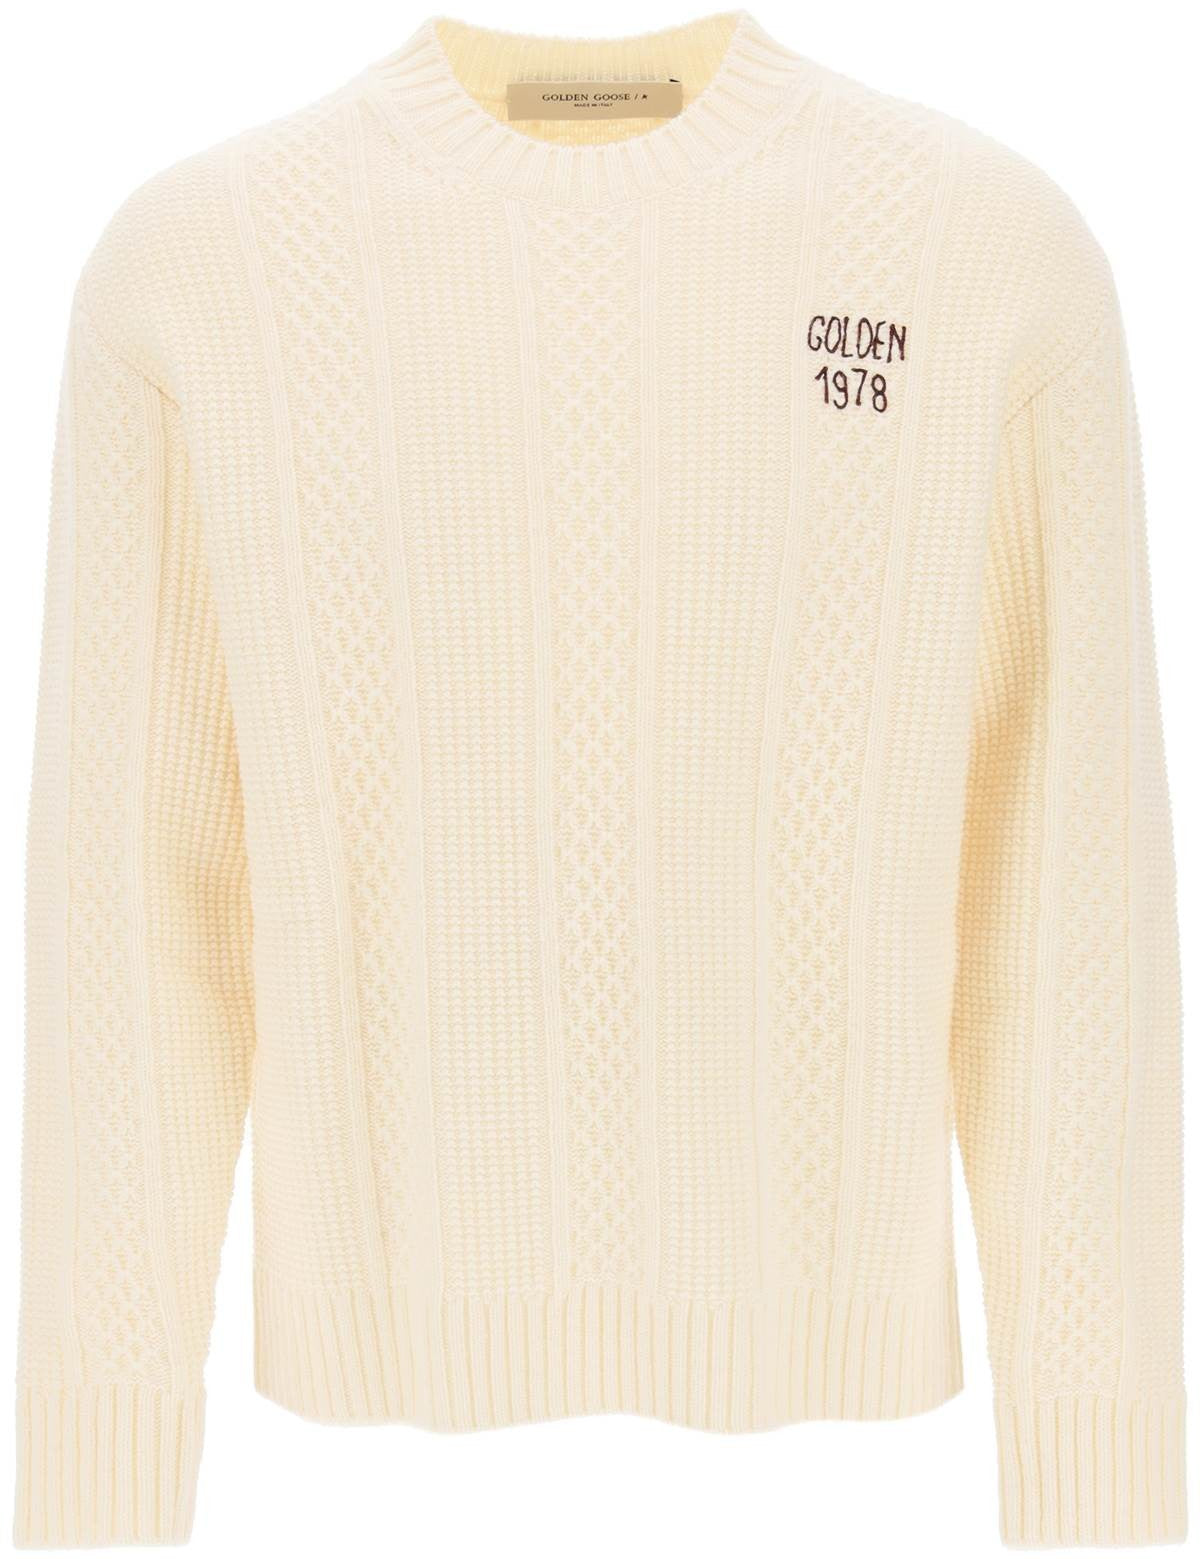 golden-goose-sweater-with-hand-embroidered-logo.jpg